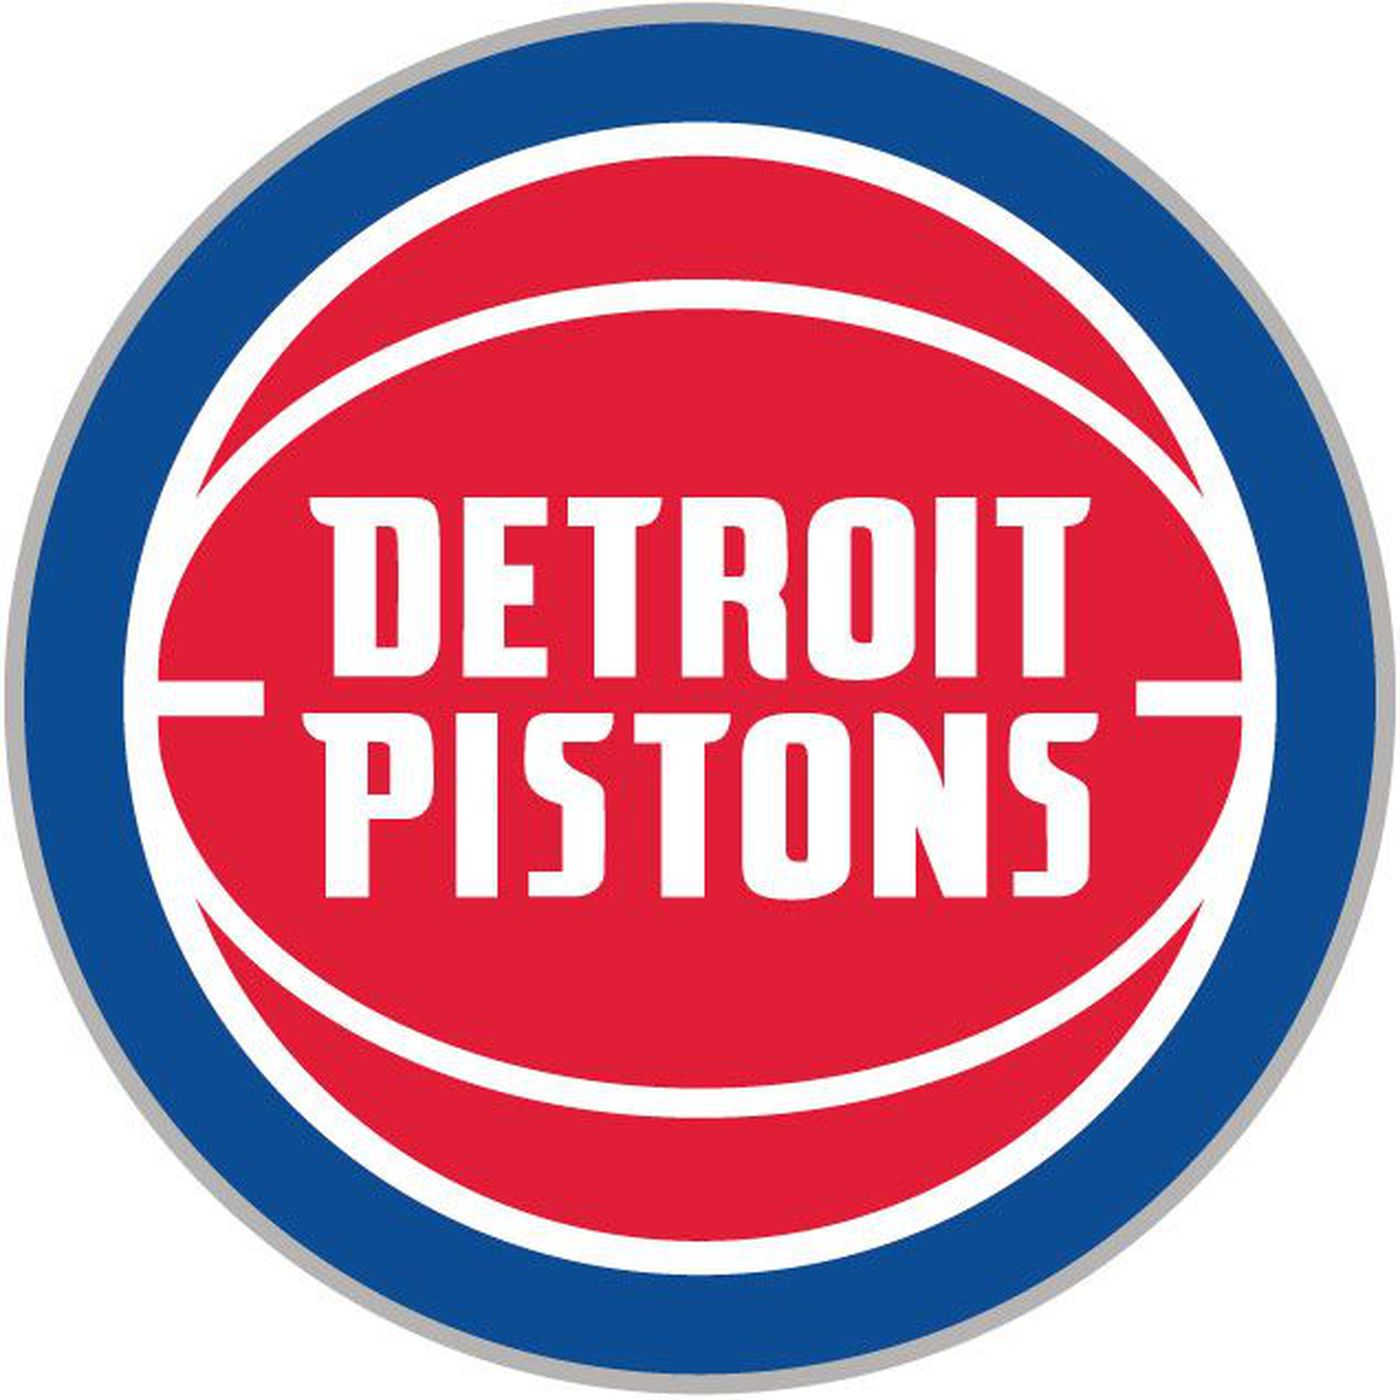 SeatSational™ welcomes the Detroit Pistons as a new client.